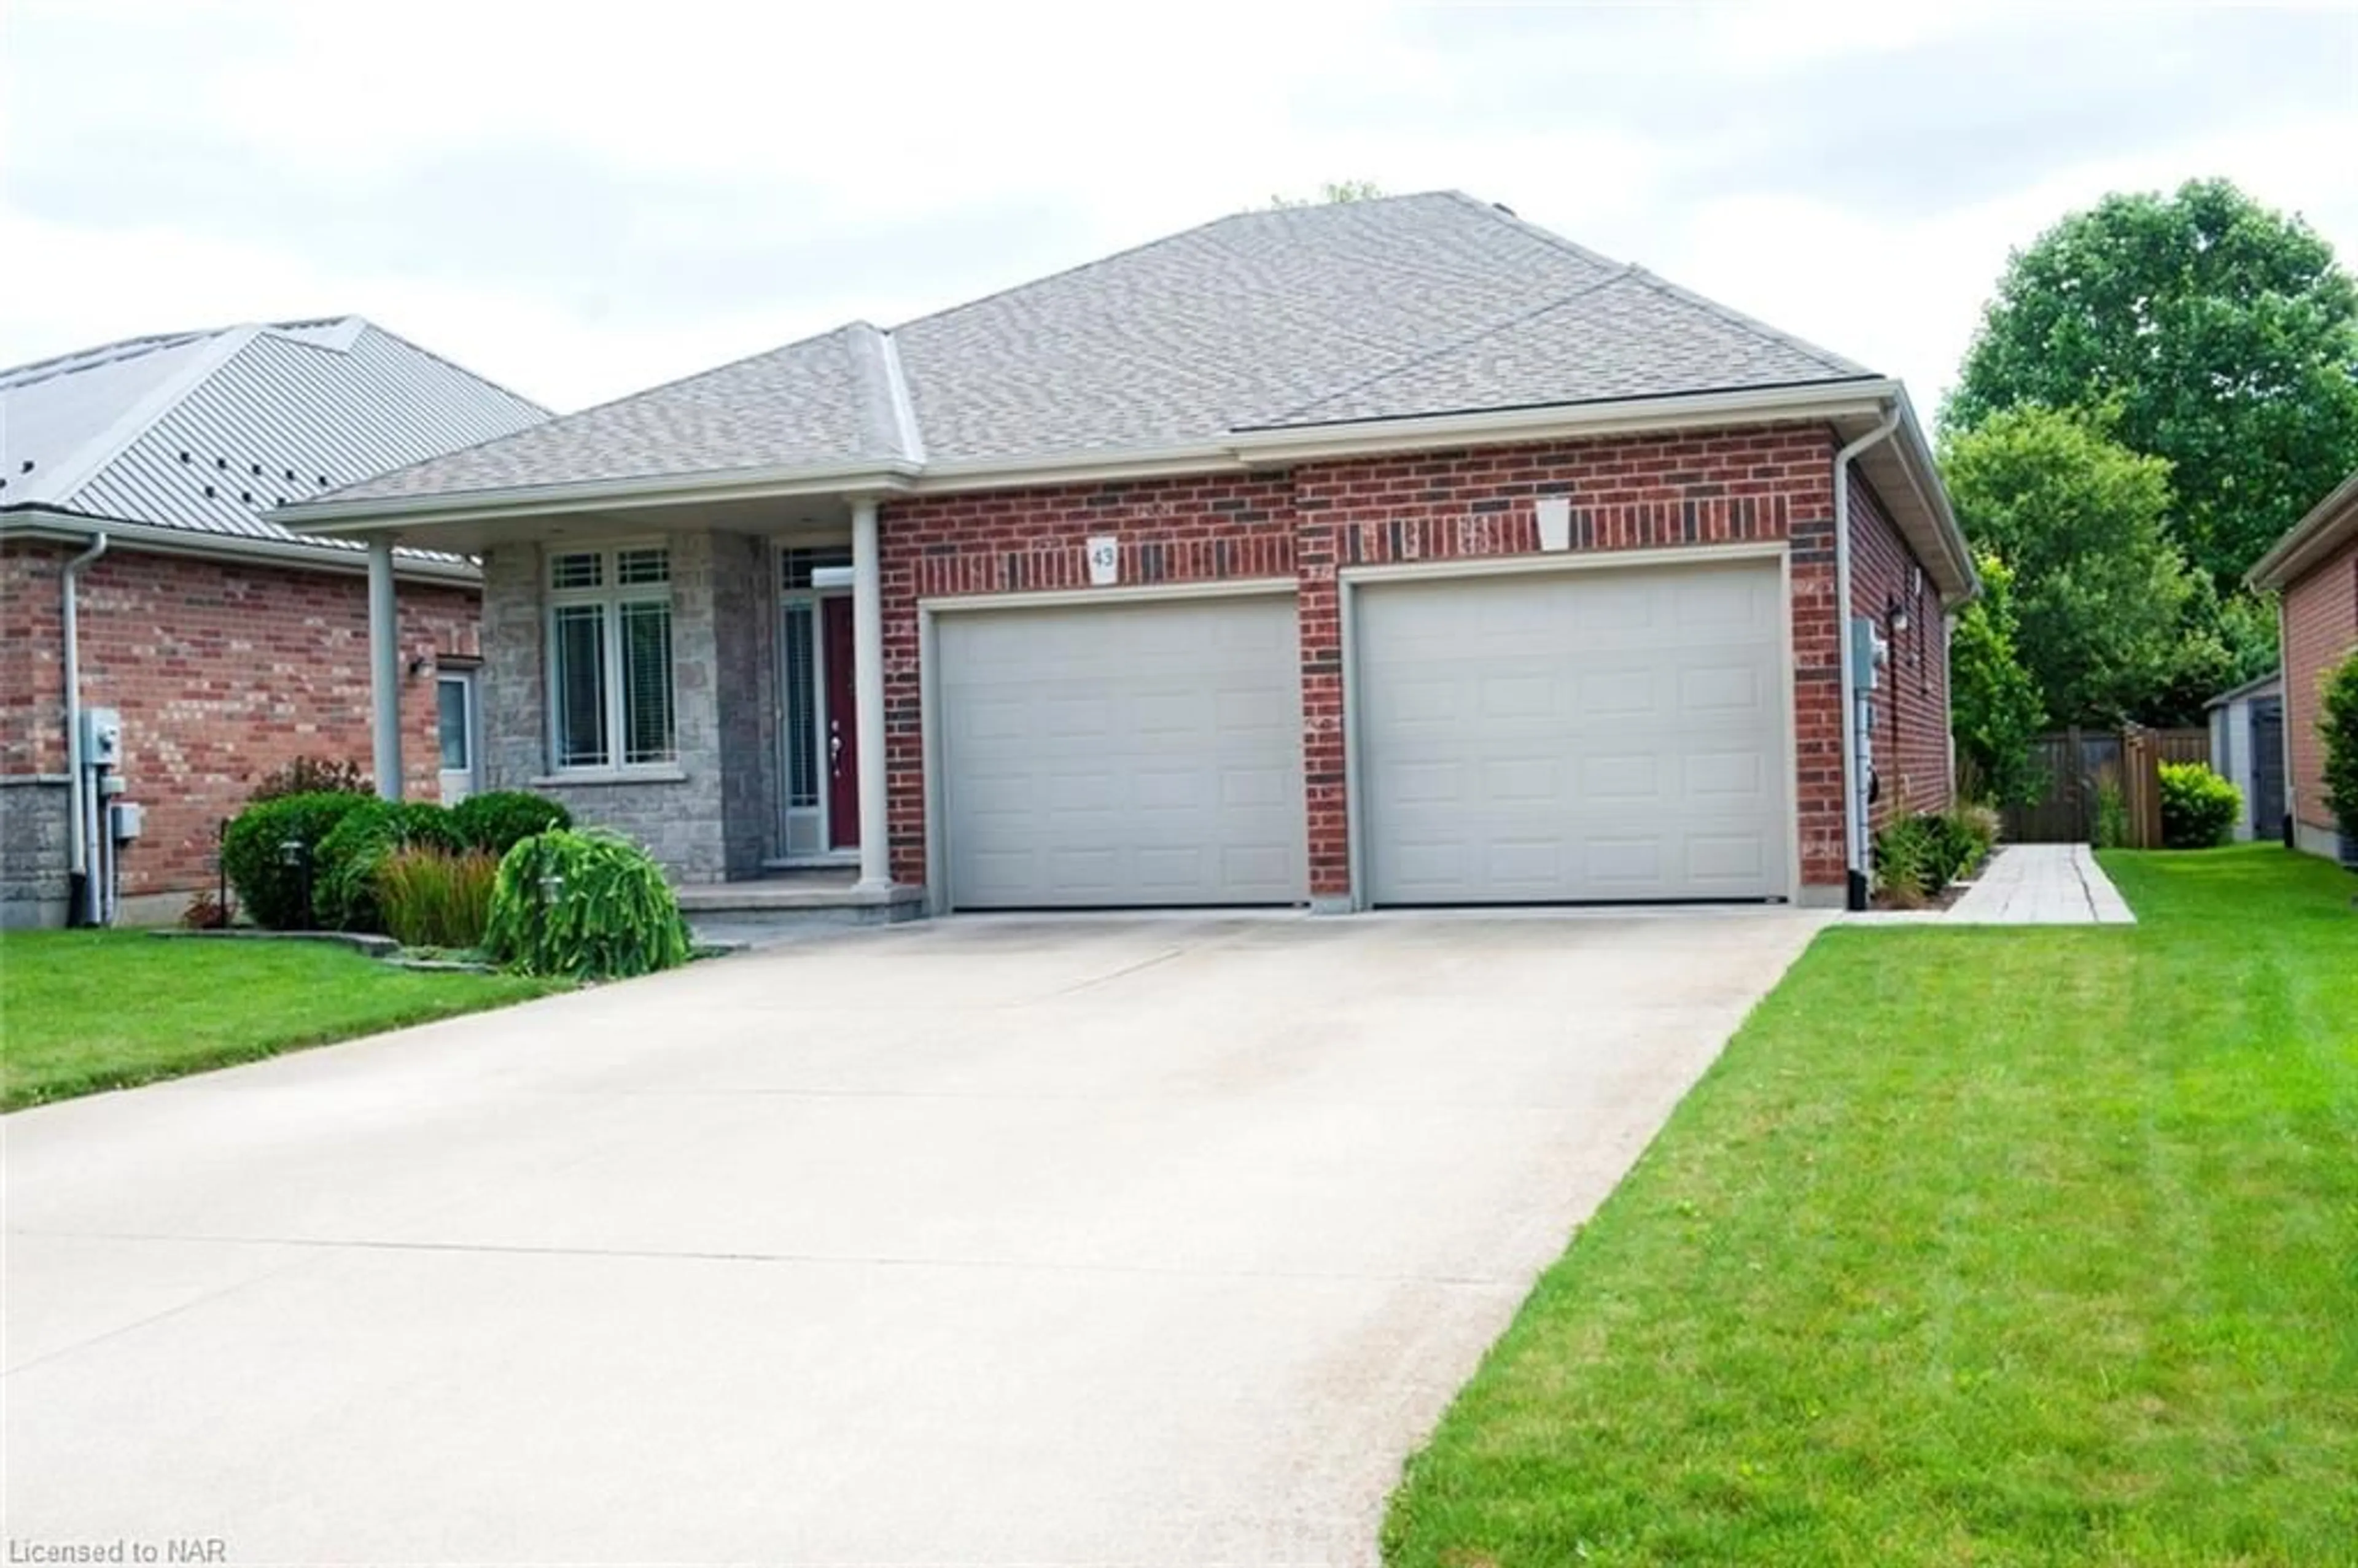 Home with brick exterior material for 43 Willson Crossing, Fonthill Ontario L0S 1E4